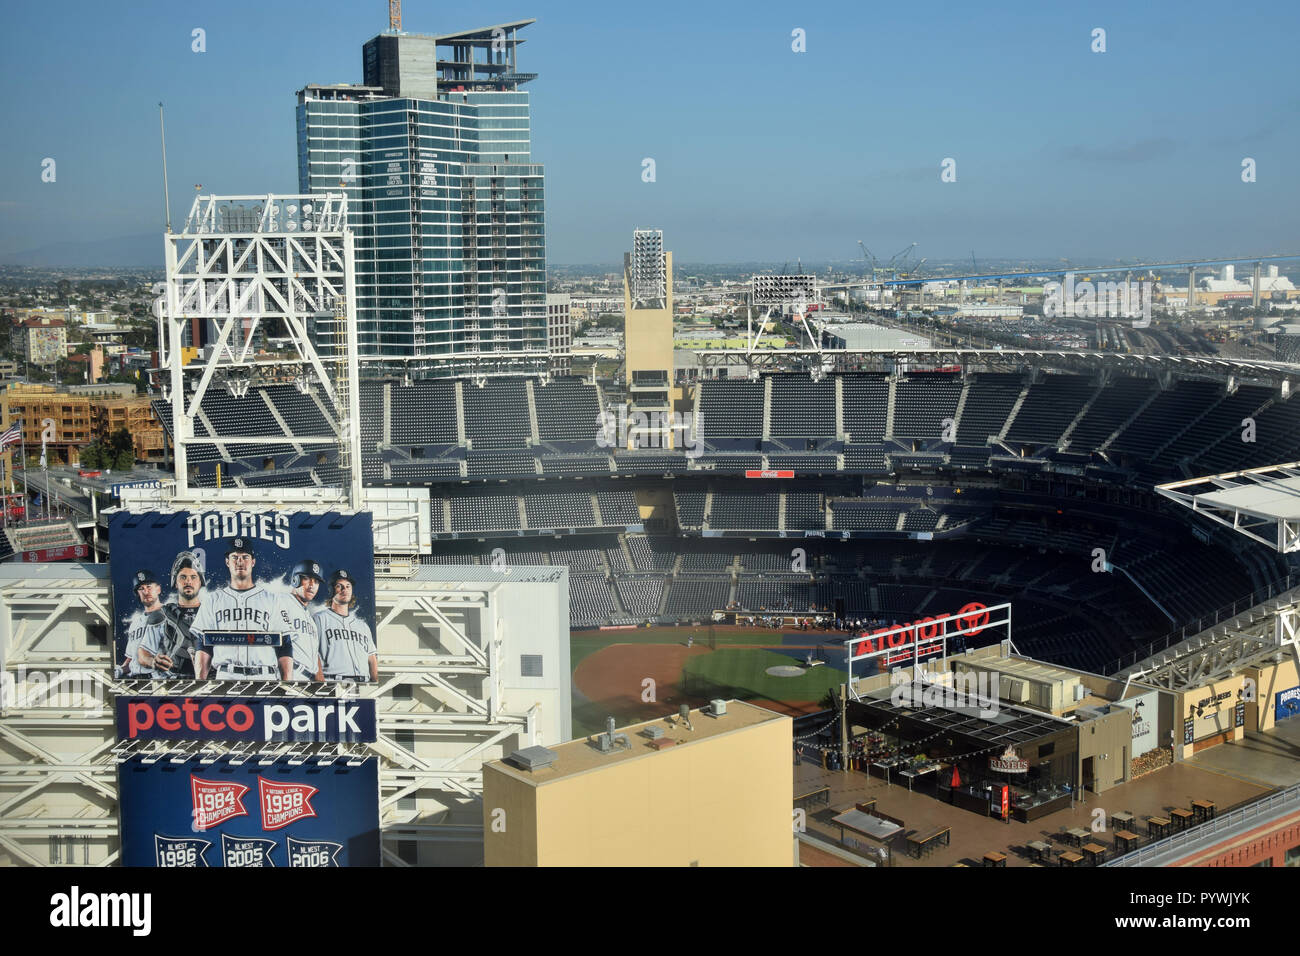 SAN DIEGO - JULY 27: Petco Park in San Diego California prepares for a night of baseball with the Padres. It is a major sports venue in San Diego. Stock Photo